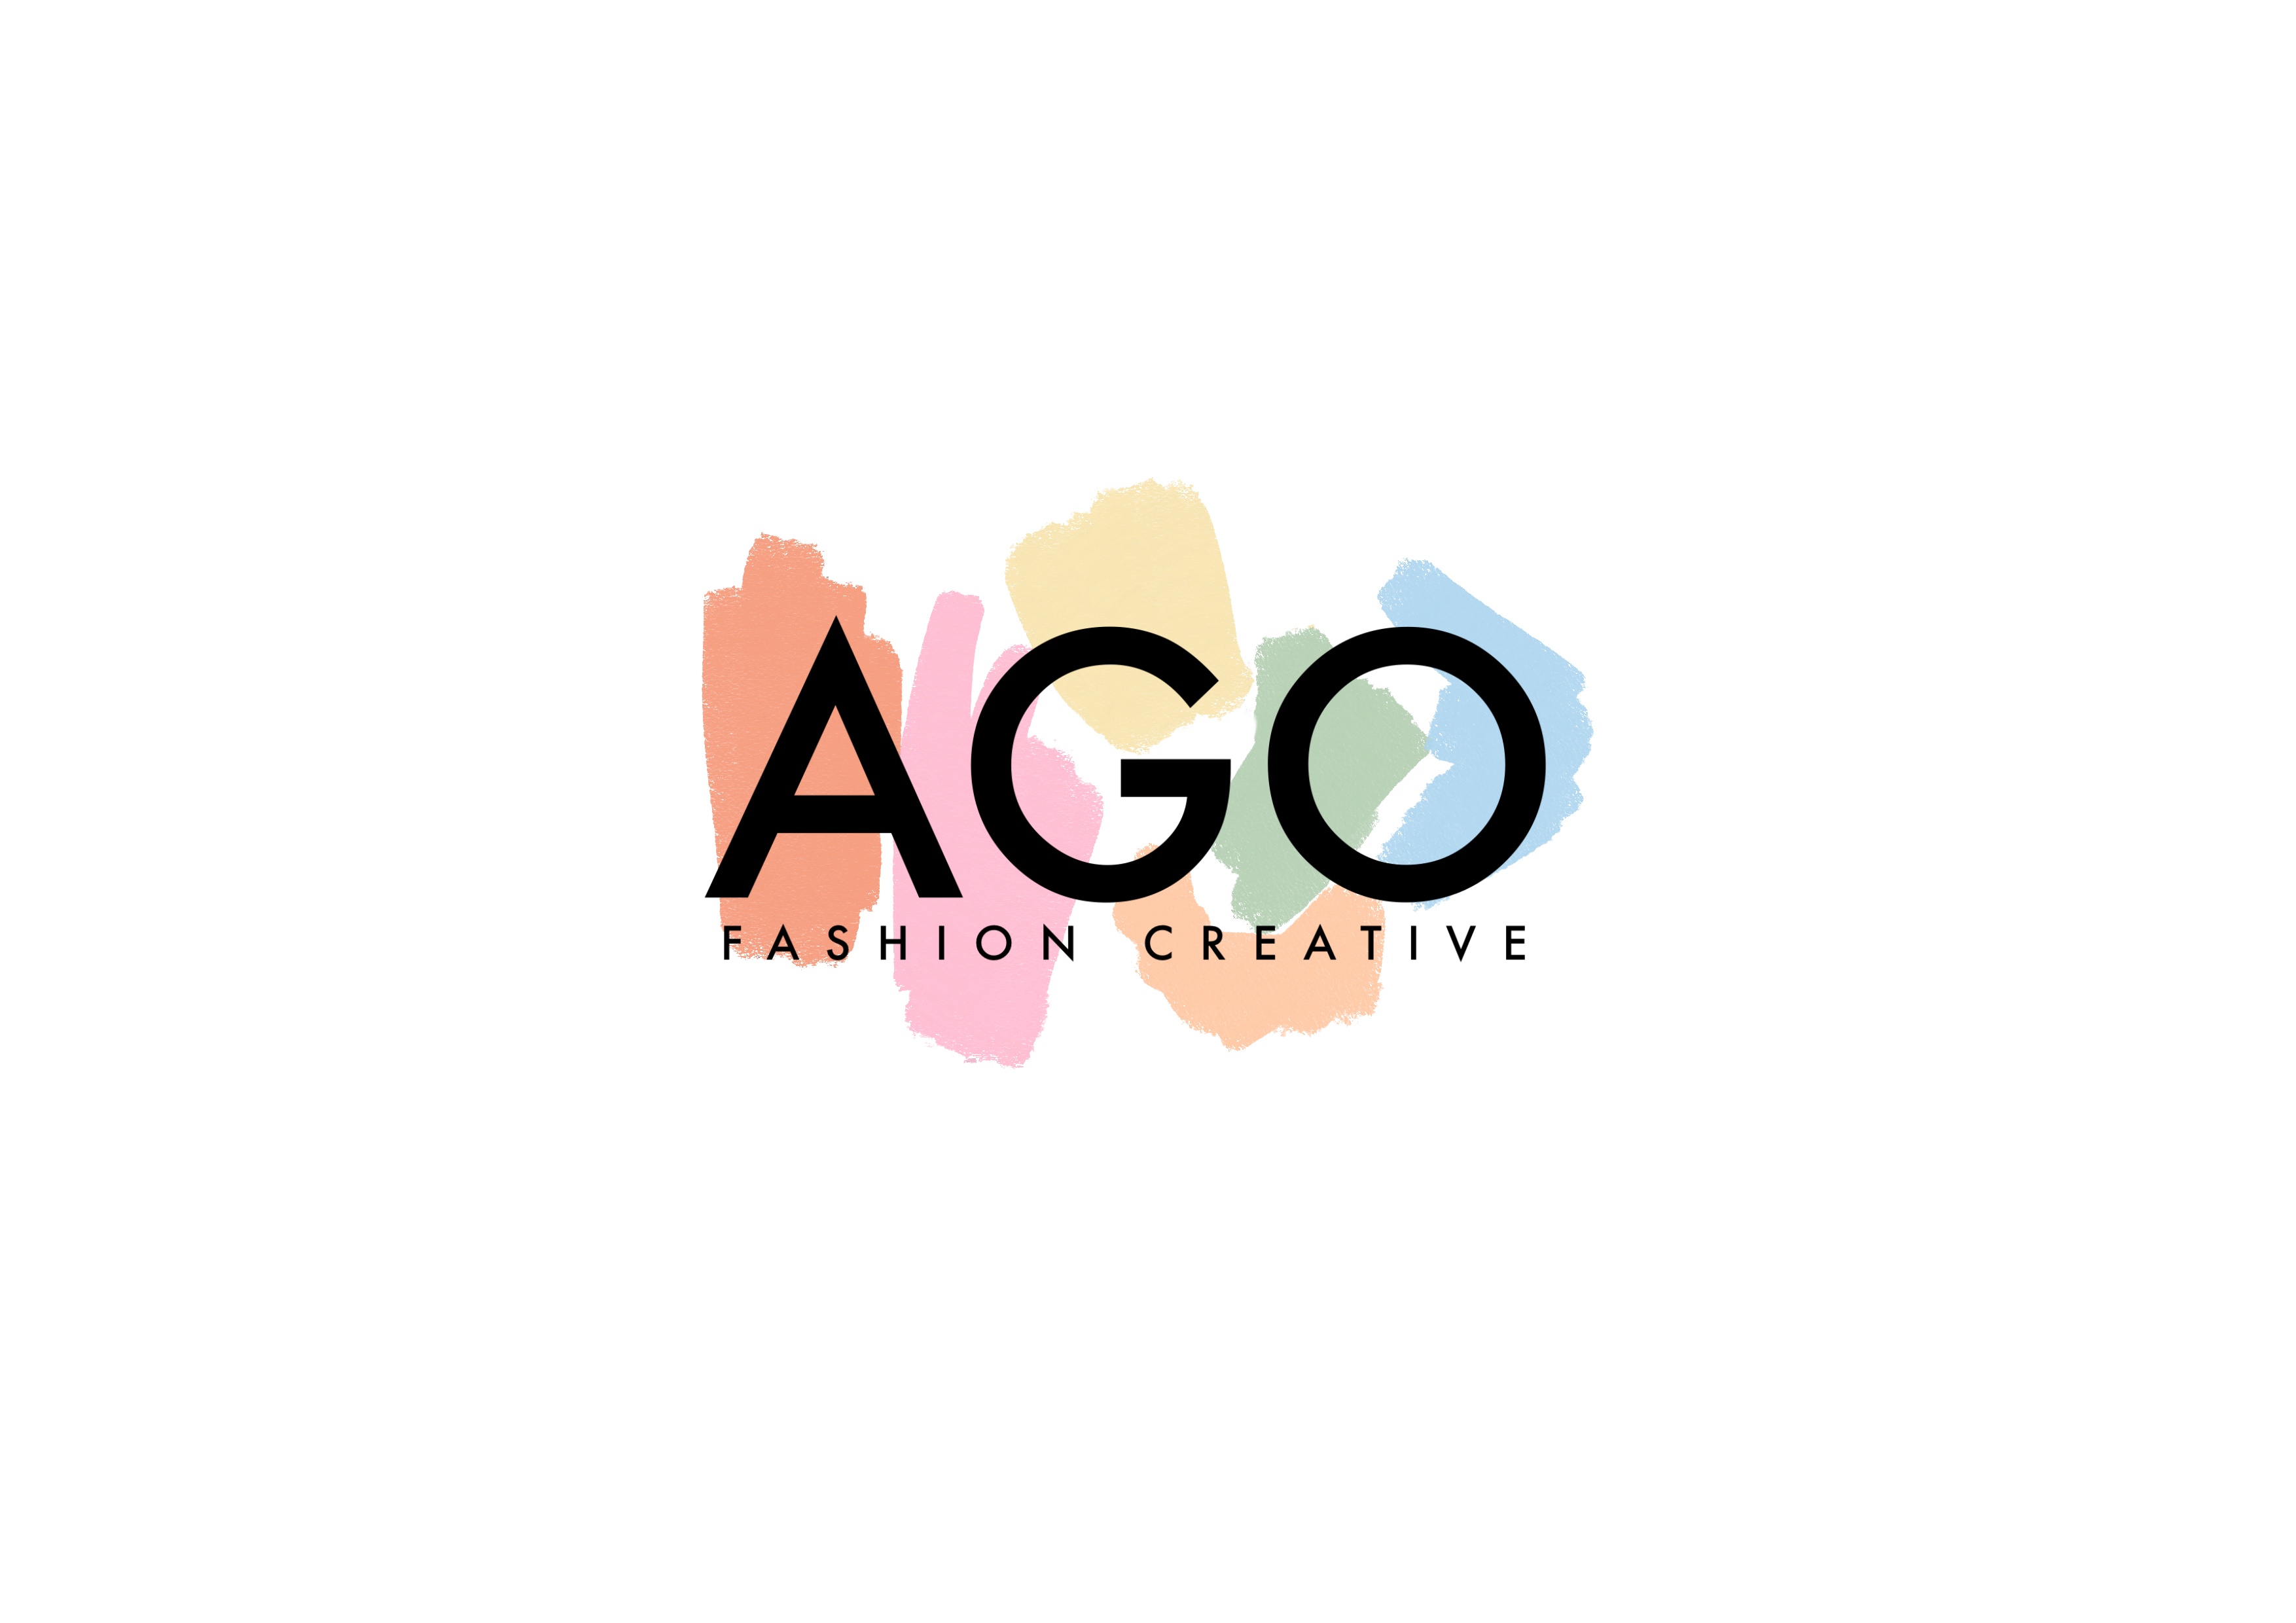 Ago fashion creative GIFs on GIPHY - Be Animated